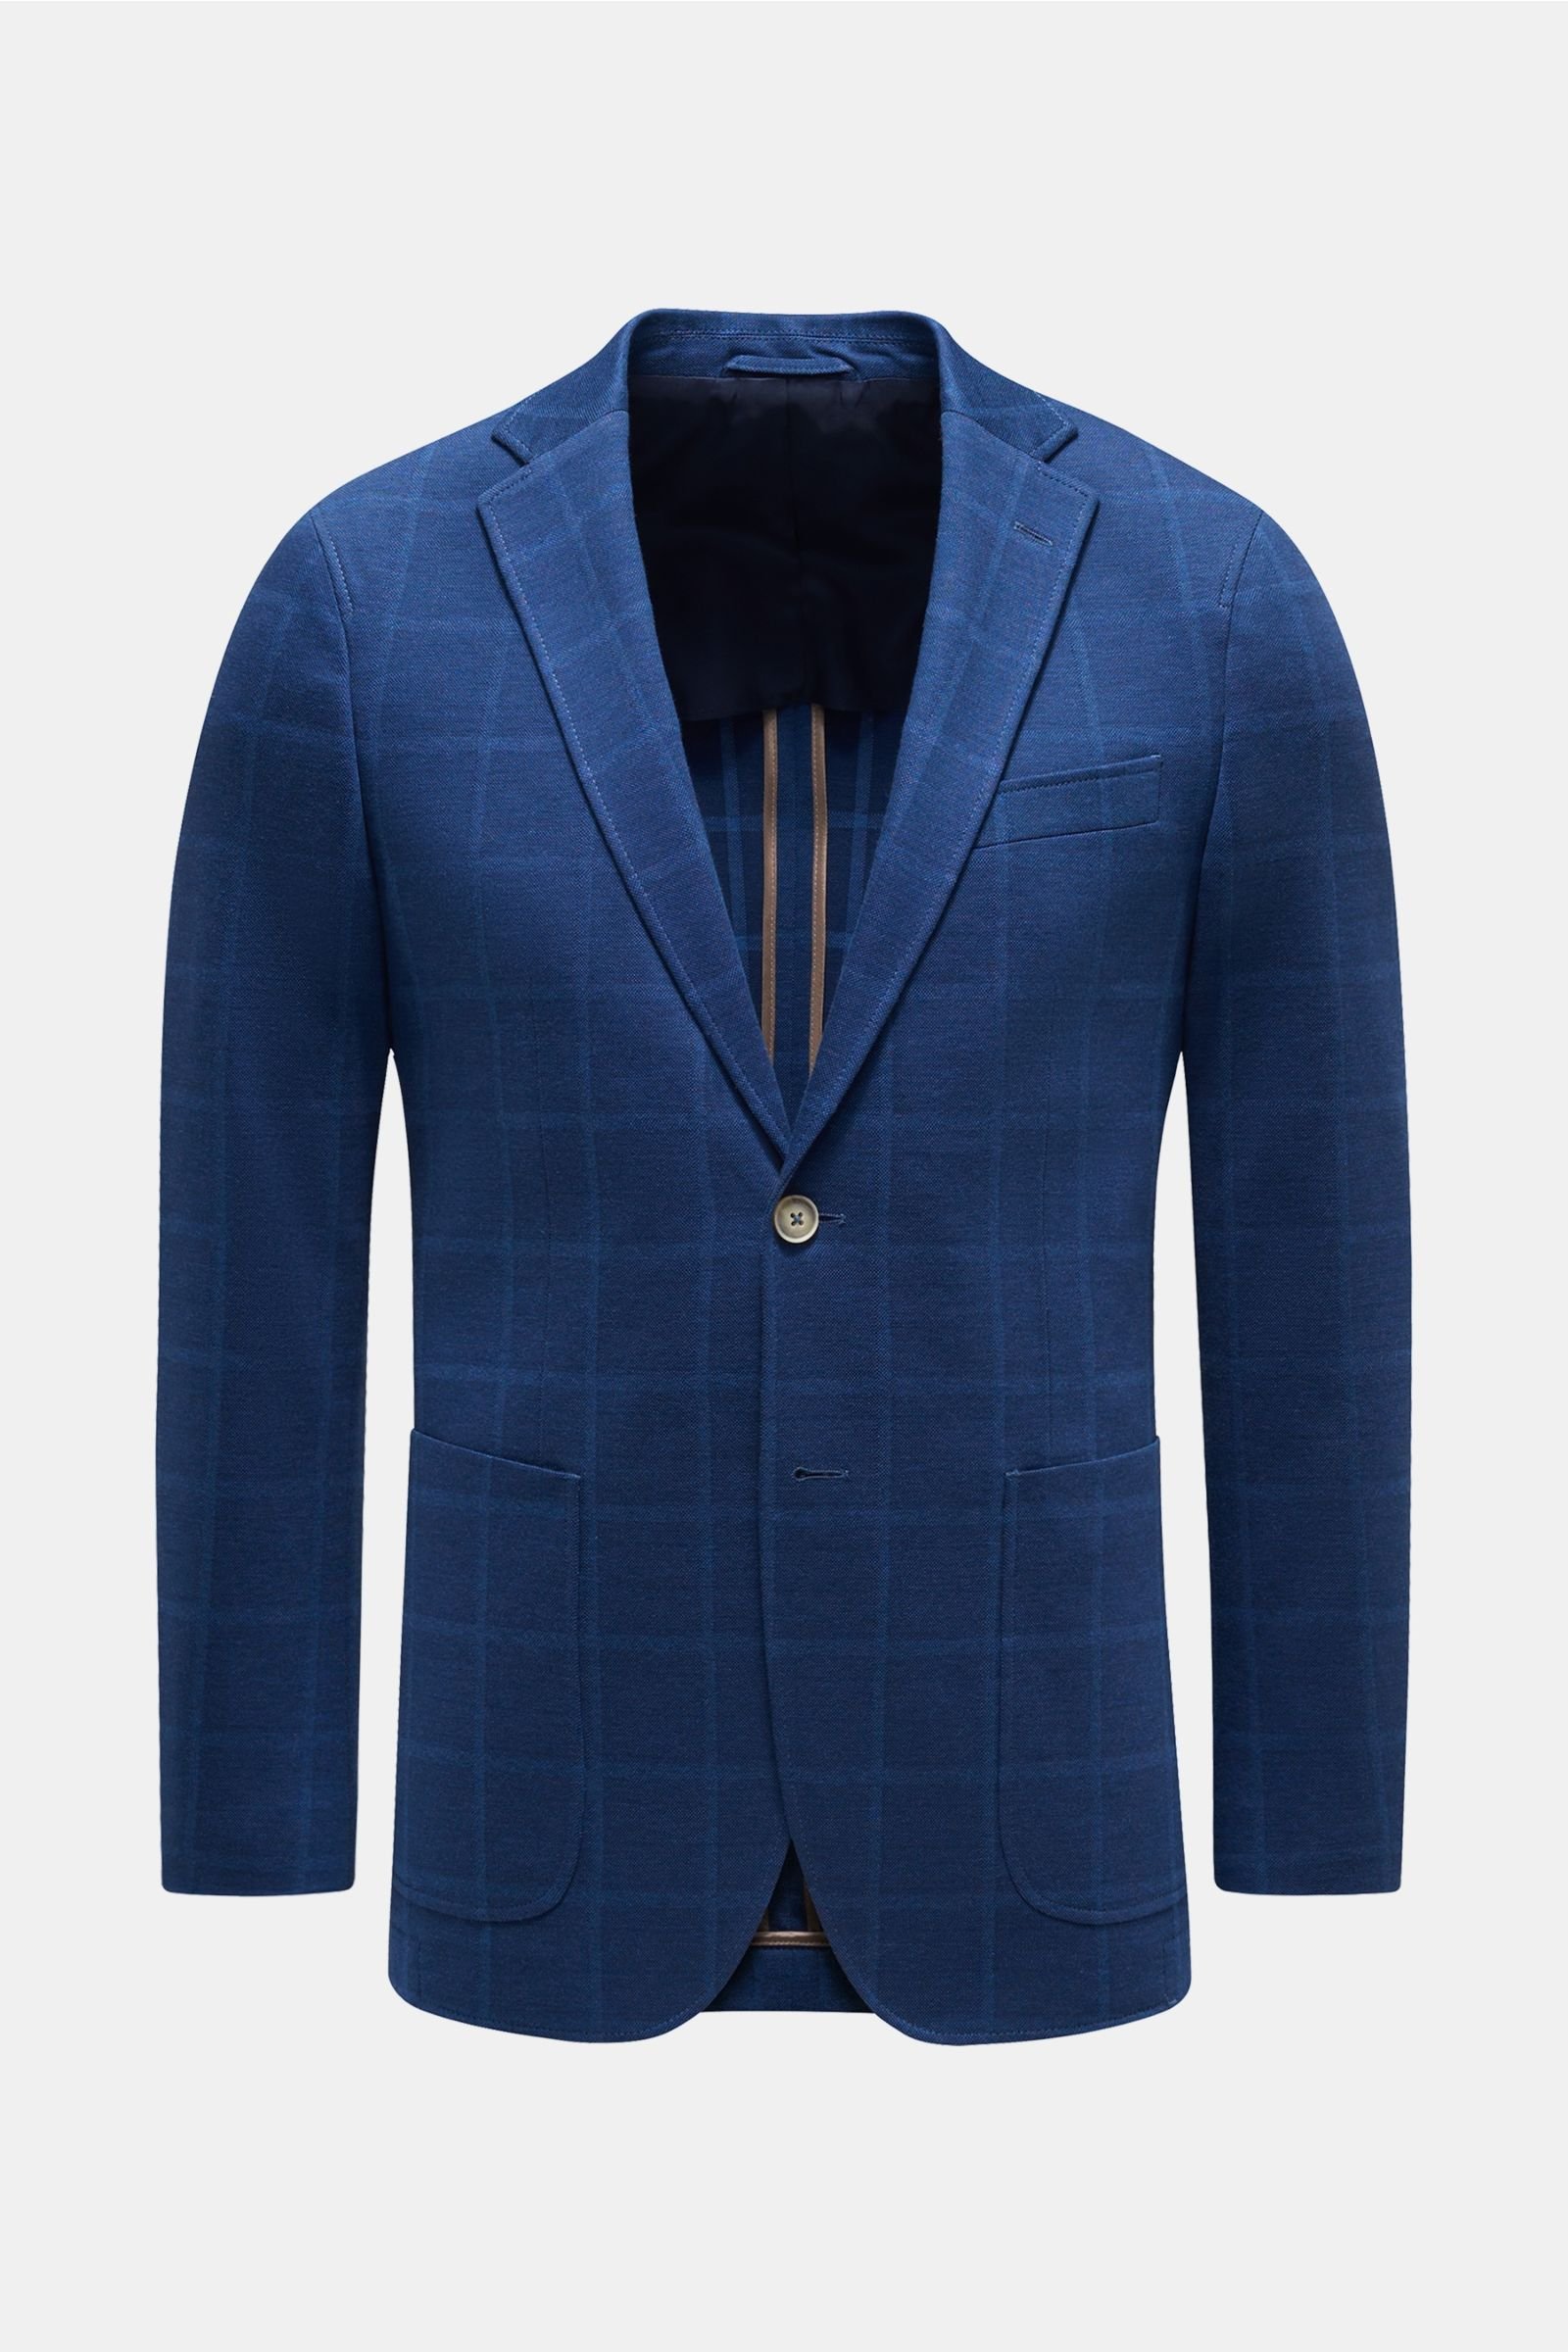 Jersey smart-casual jacket dark blue checked